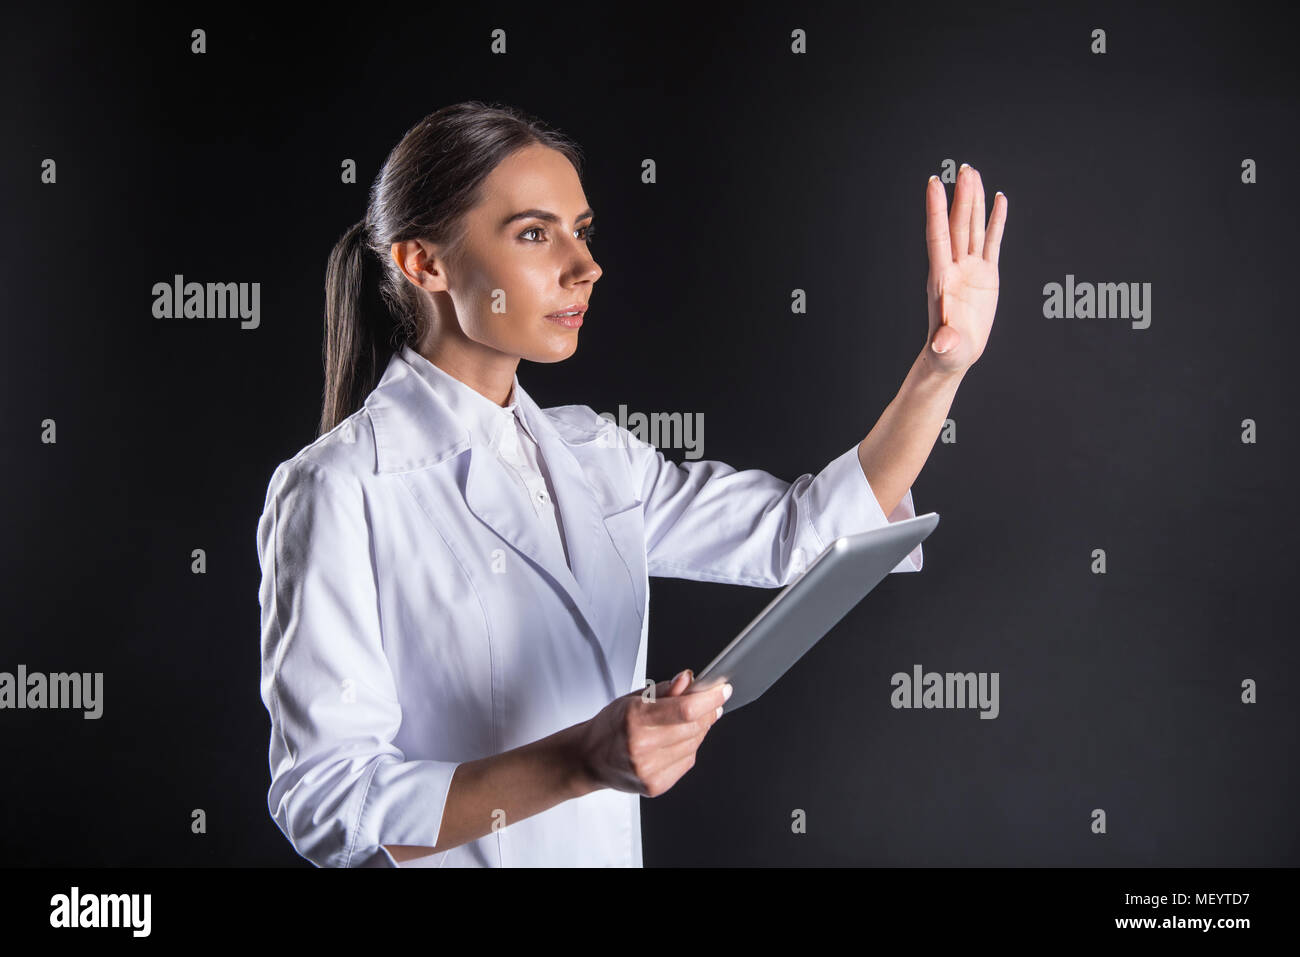 Smart intelligent scientist holding a tablet Stock Photo